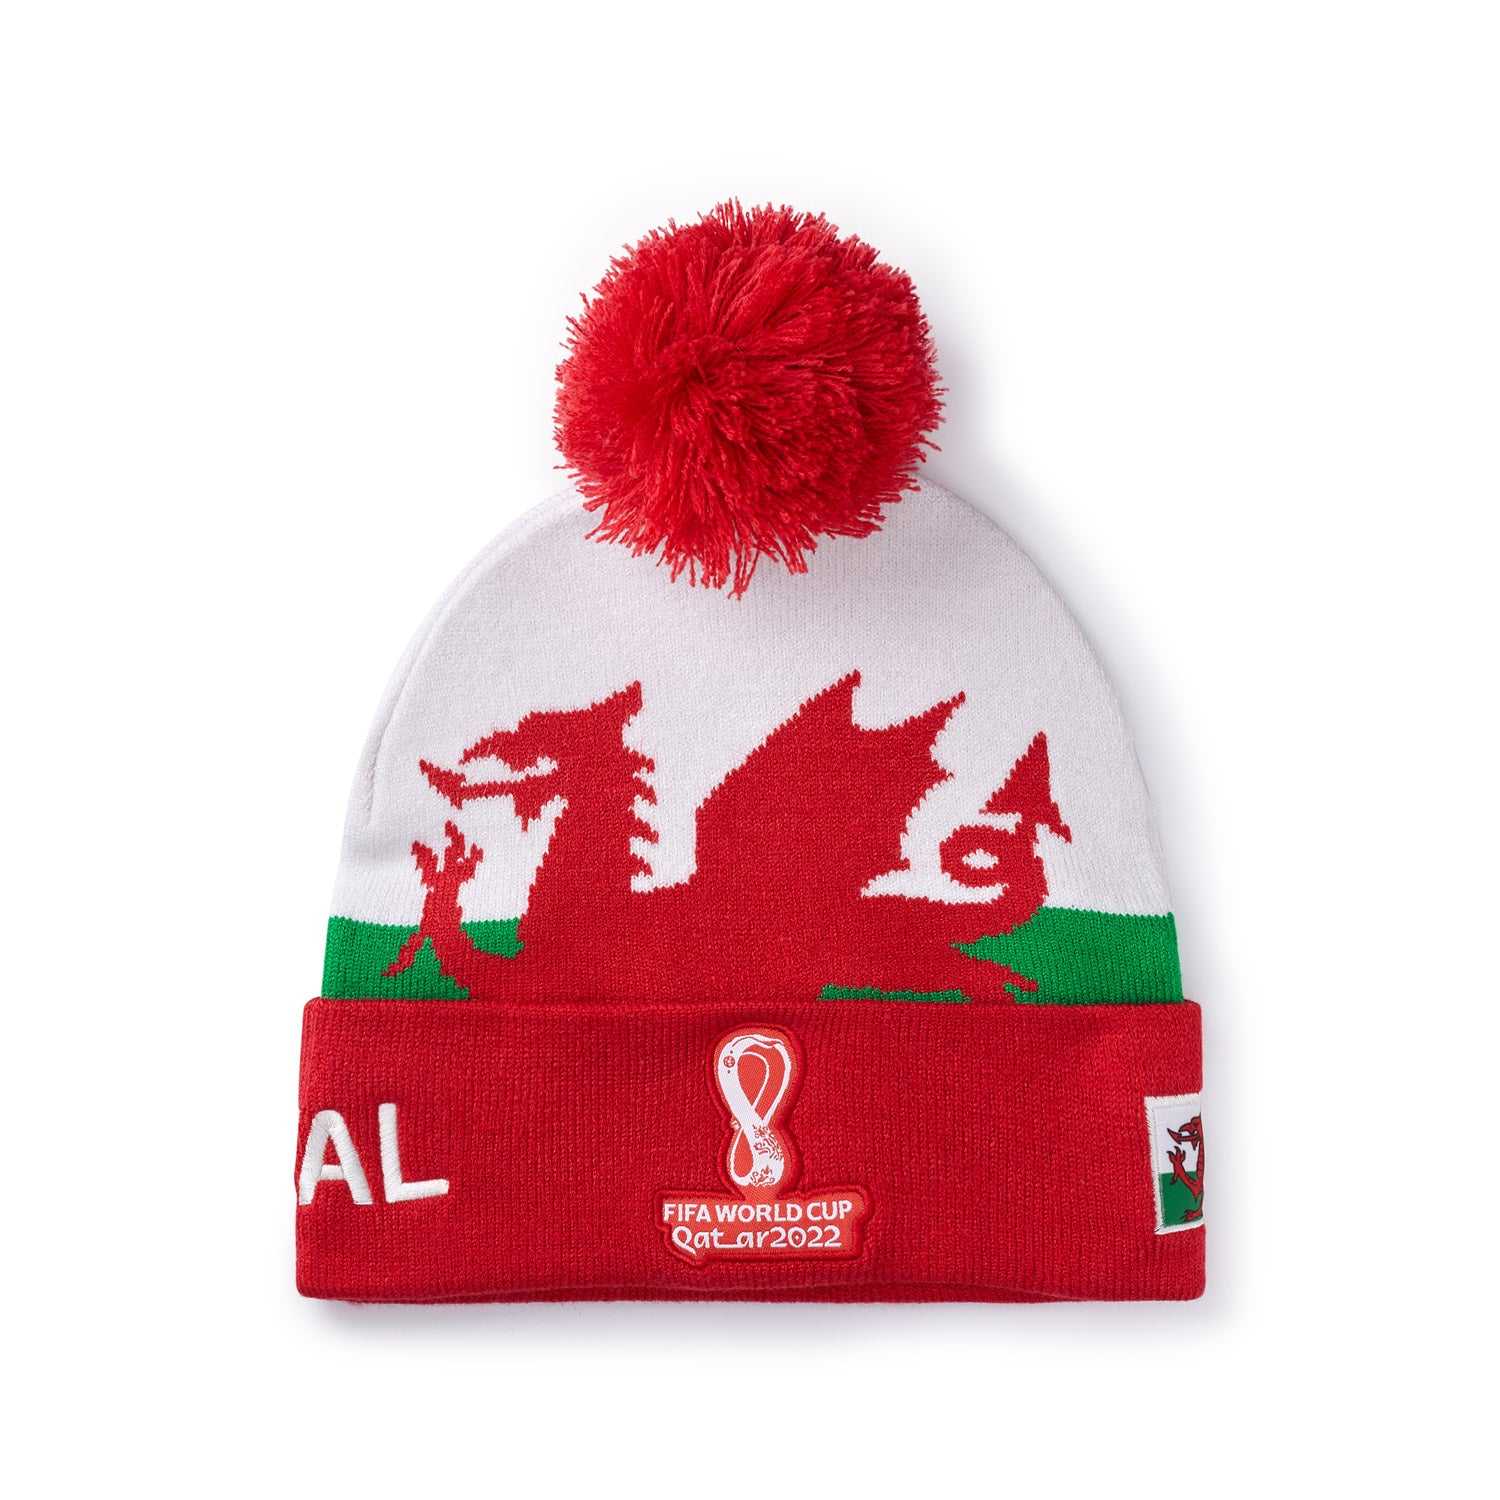 2022 World Cup Wales White Hat - Mens